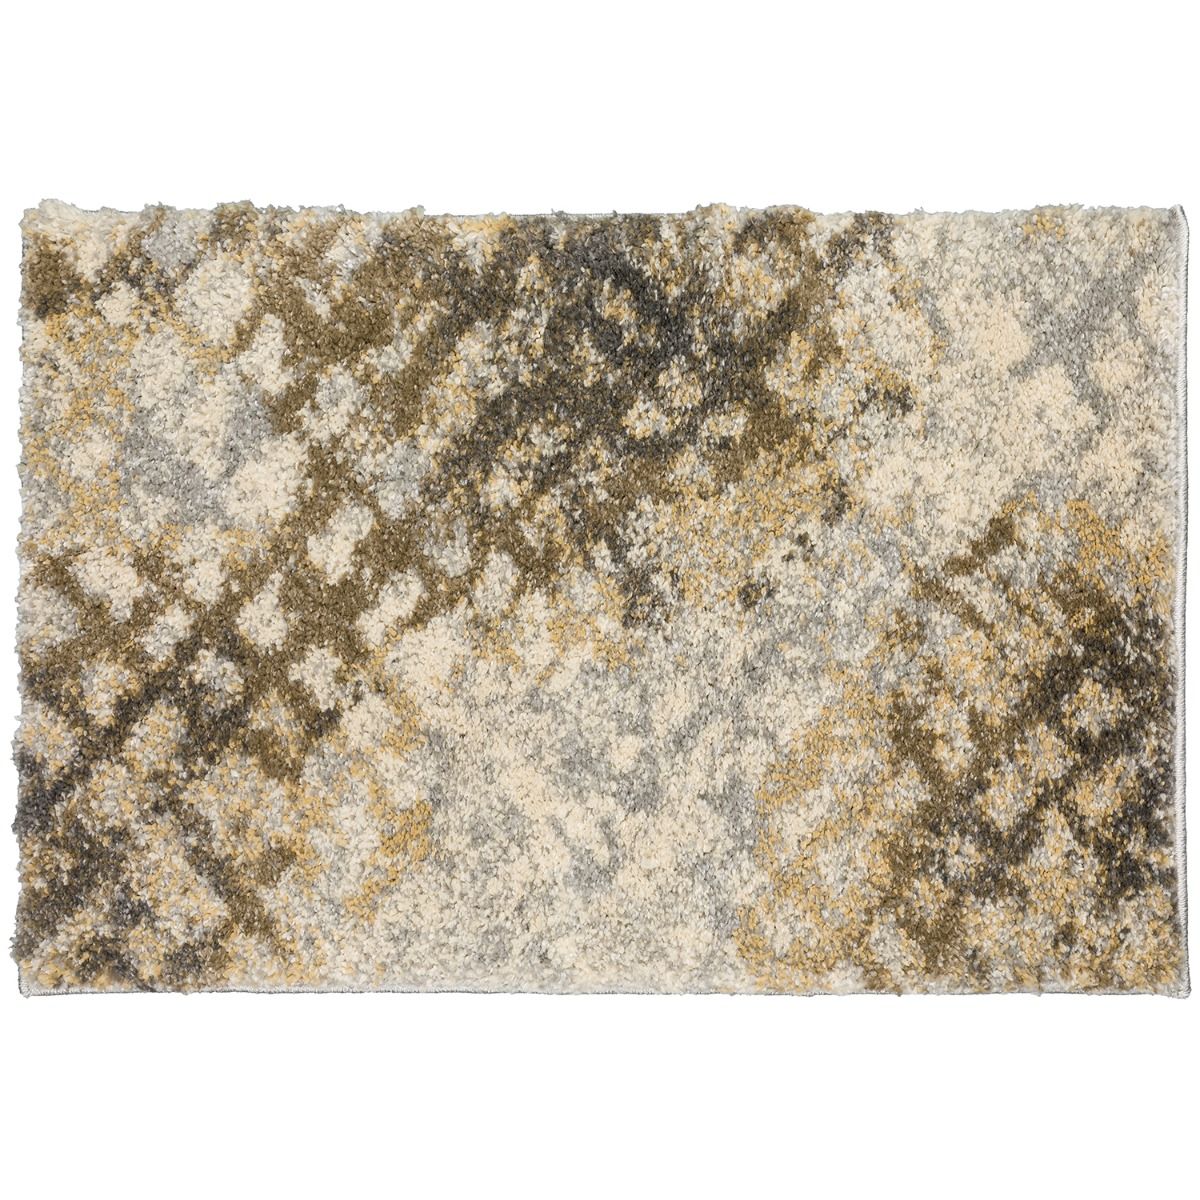 Orleans Series XV Entry Rugs